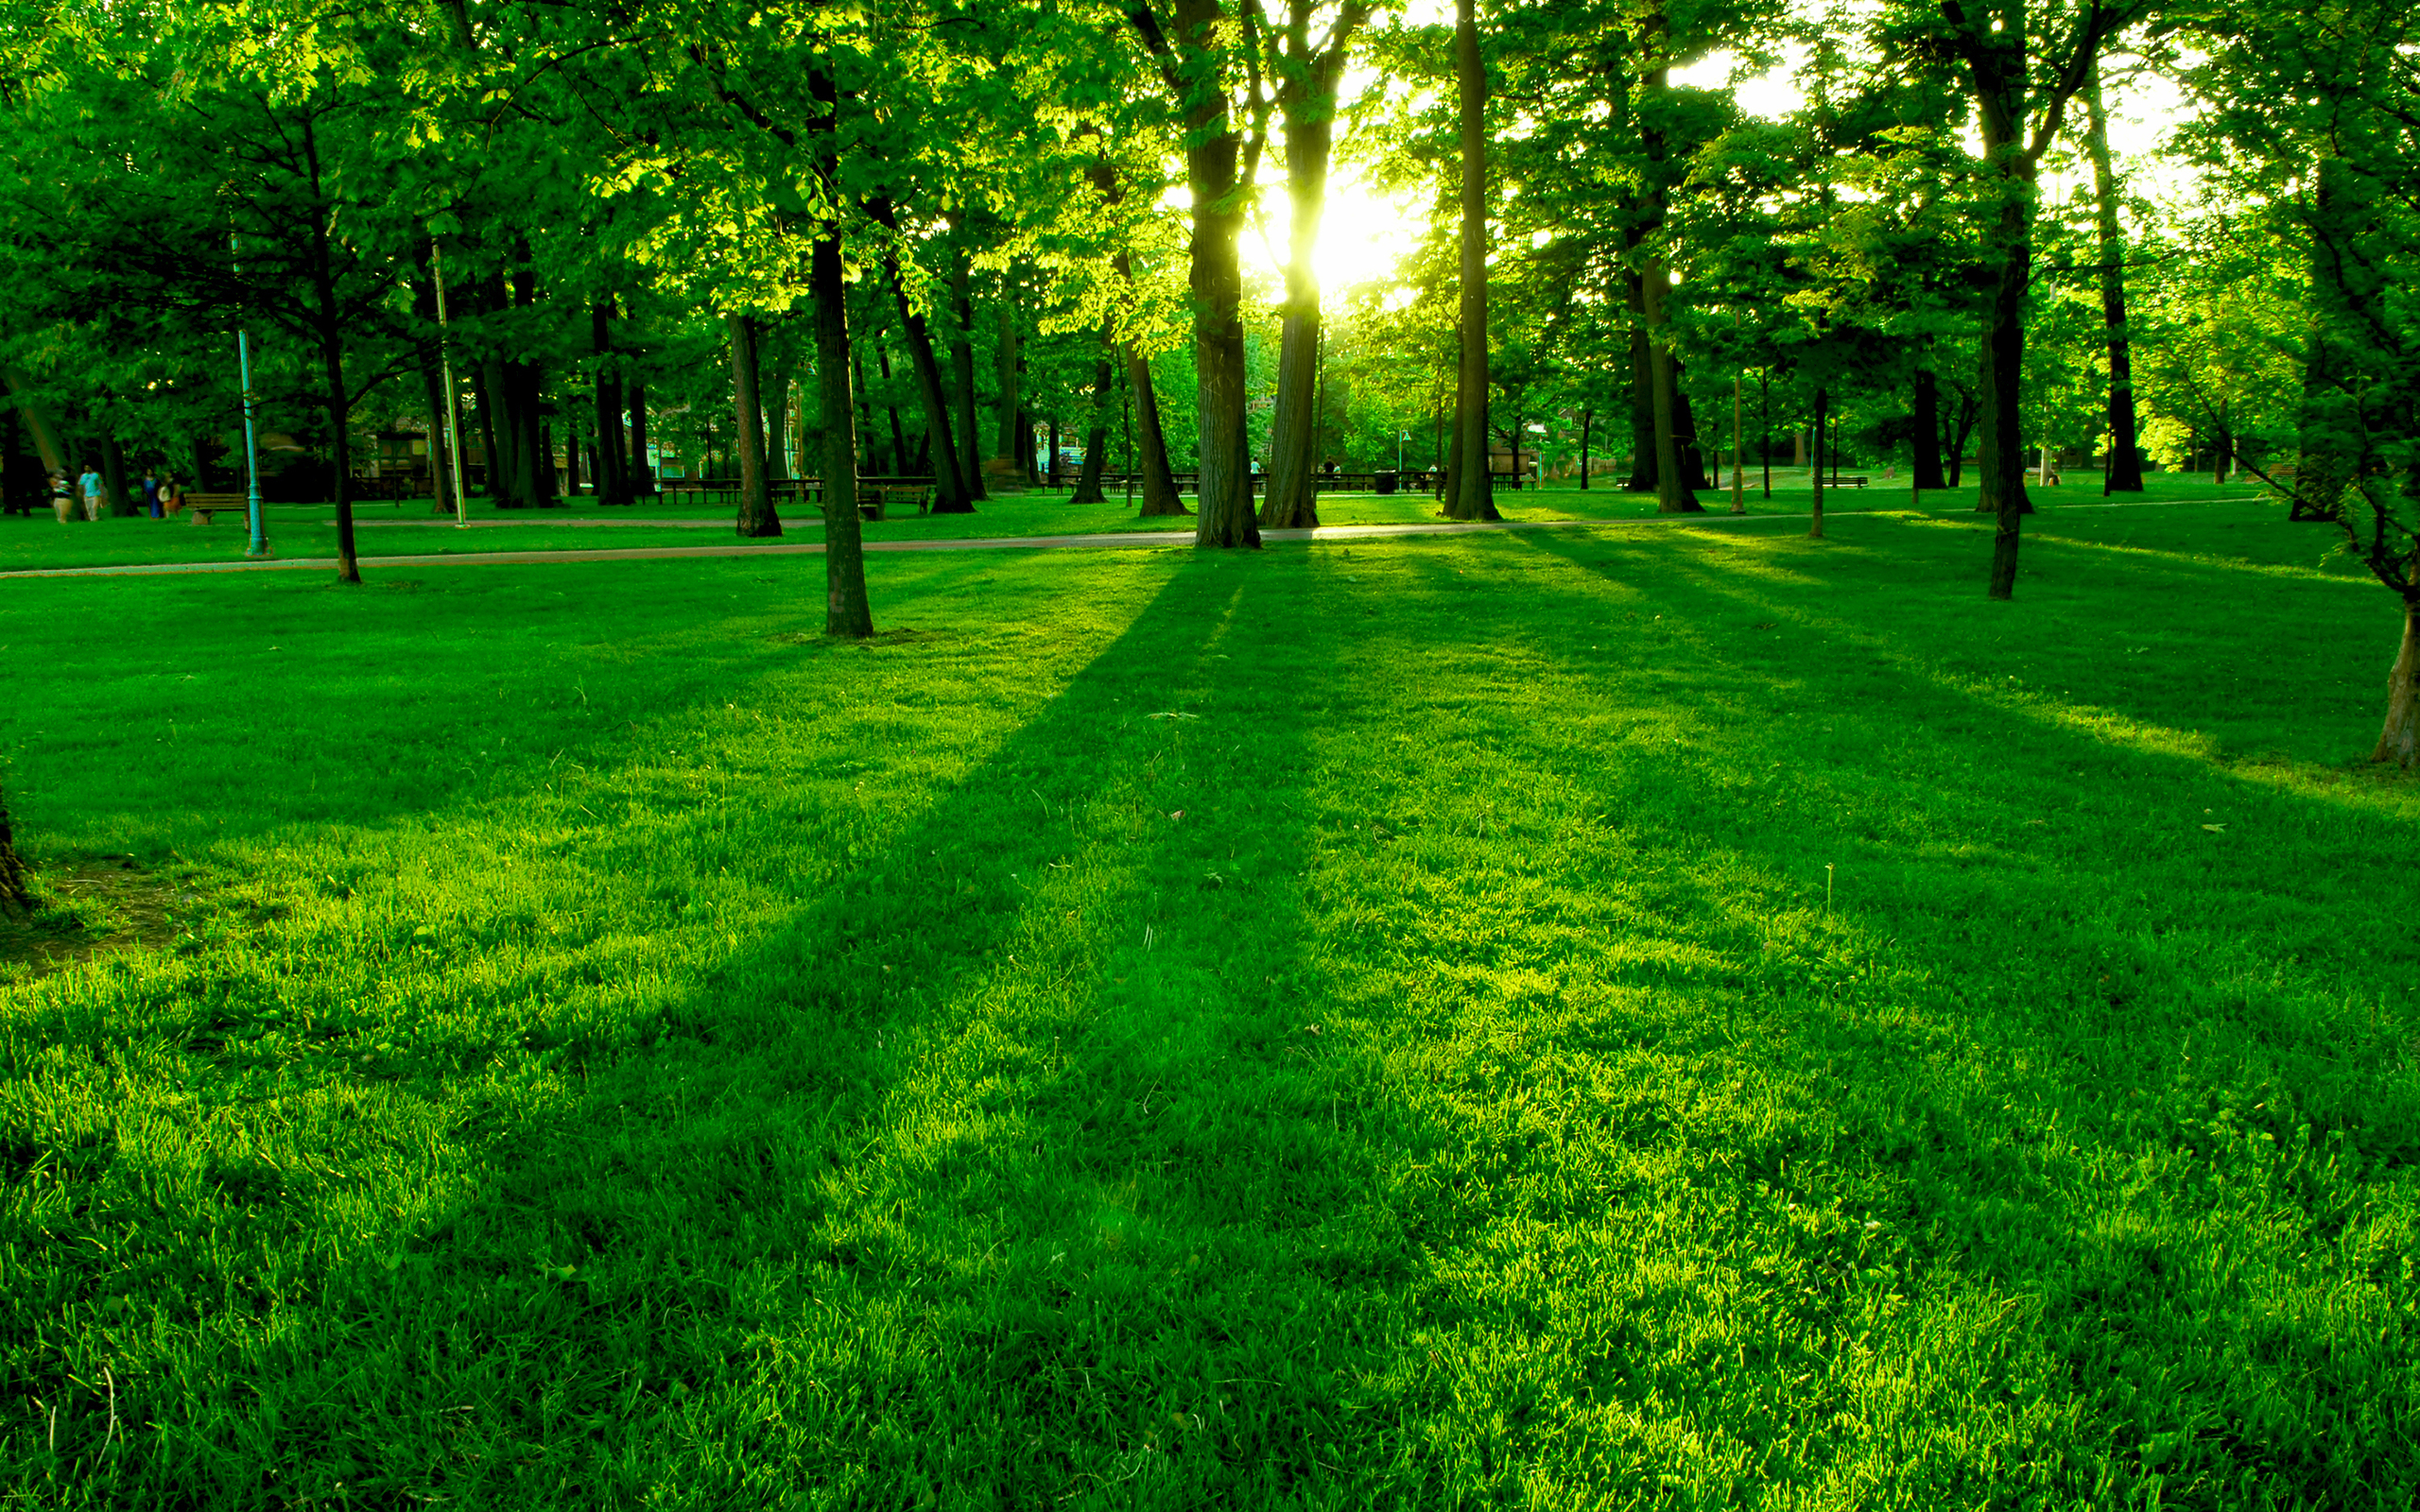 Scenic park at sunrise with lush green grass